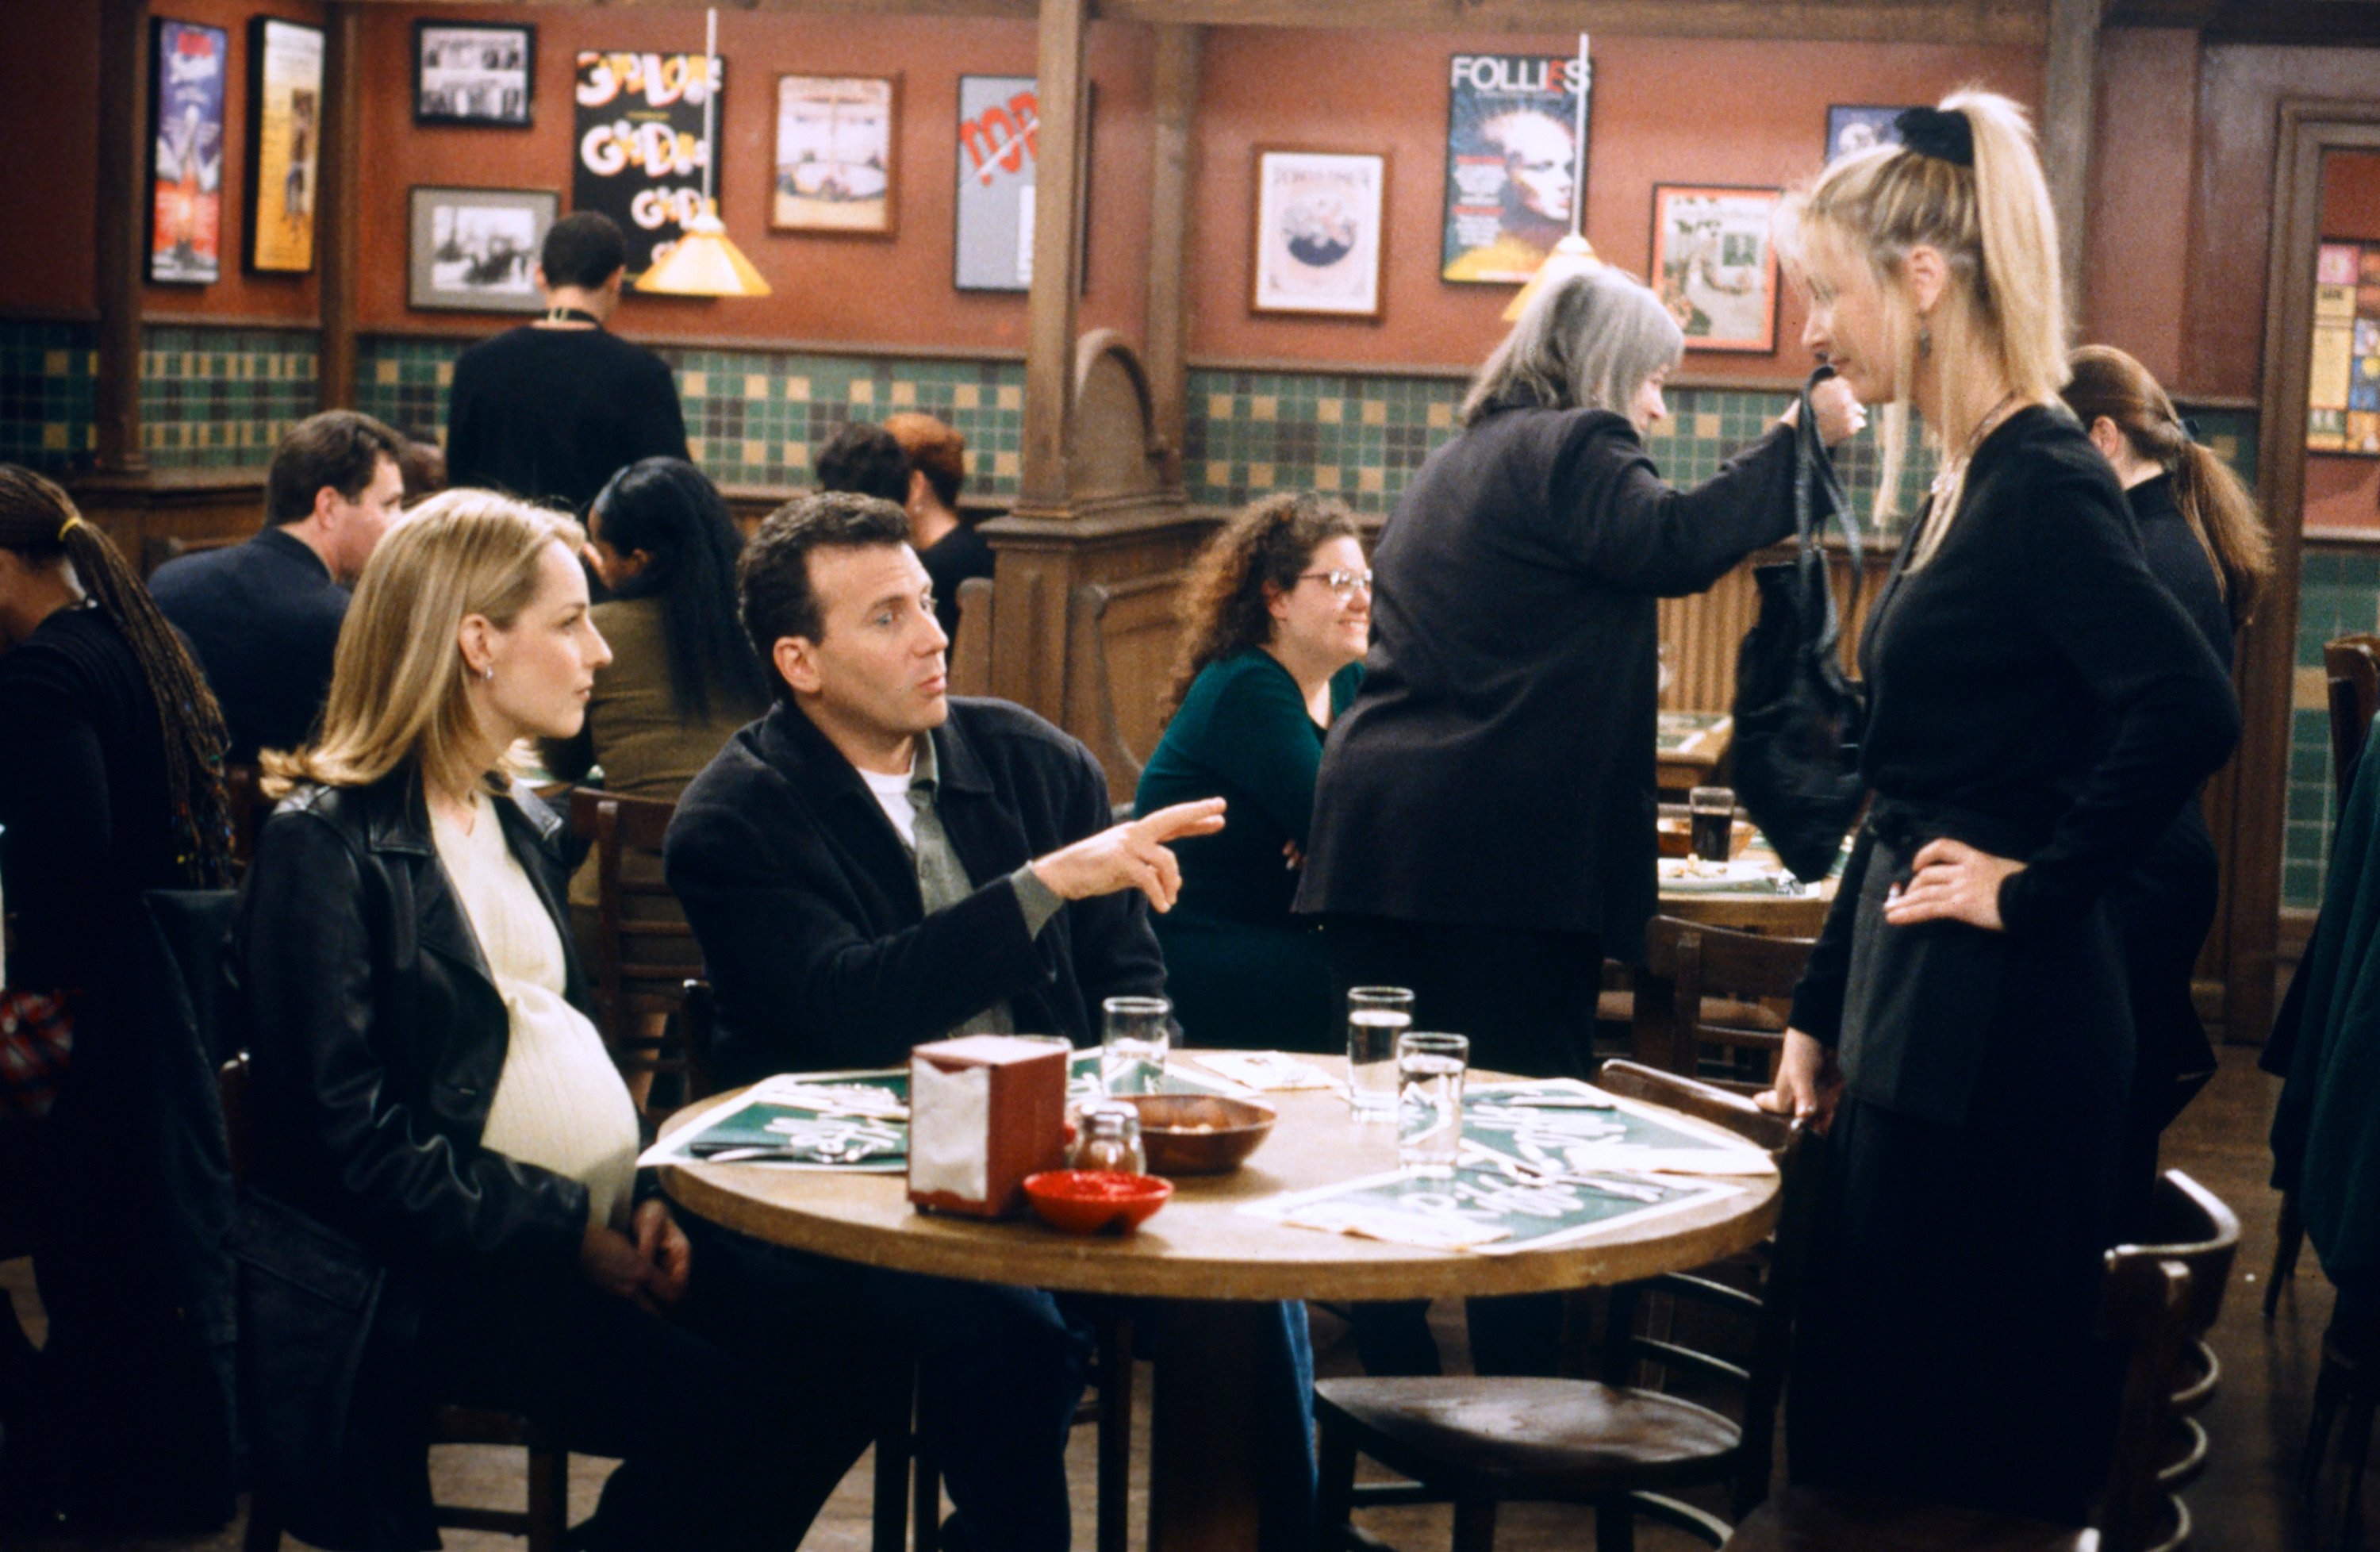 Helen Hunt as Jamie Stemple Buchman, Paul Reiser as Paul Buchman, and Lisa Kudrow as Ursula Buffay are seen in Riff's during an episode of 'Mad About You'